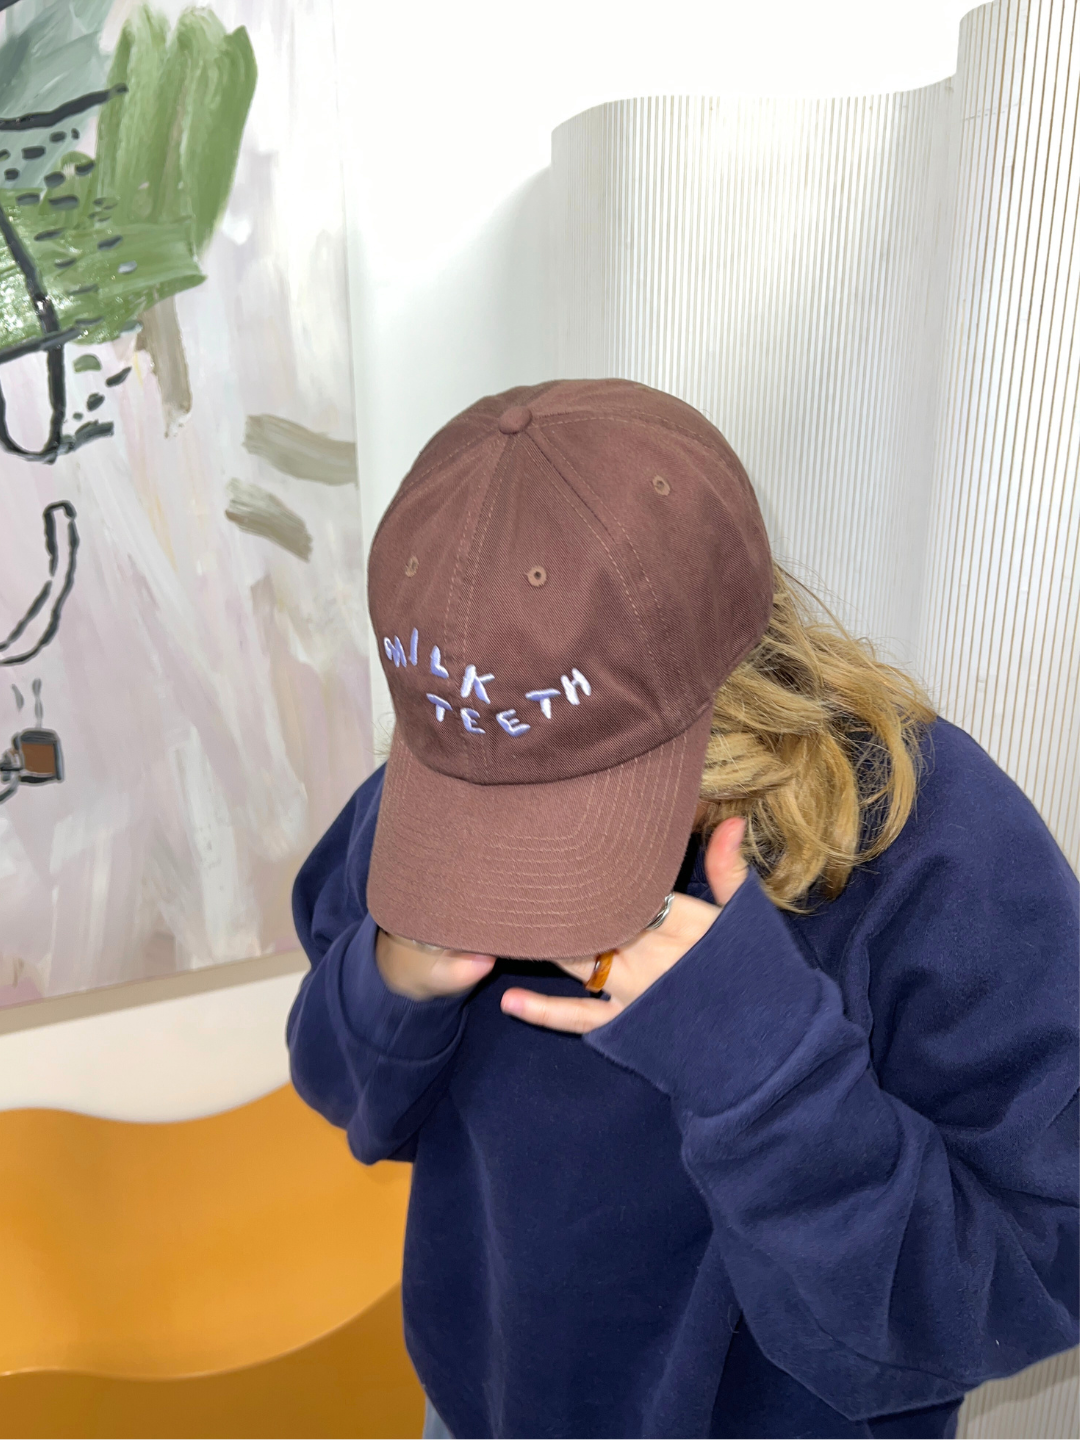 Brown | An adult wearing the Milk teeth adult baseball cap in brown with lavender logo embroidery. They wear a navy sweatshirt in a white room. Behind them is an orange bench and an abstract painting.